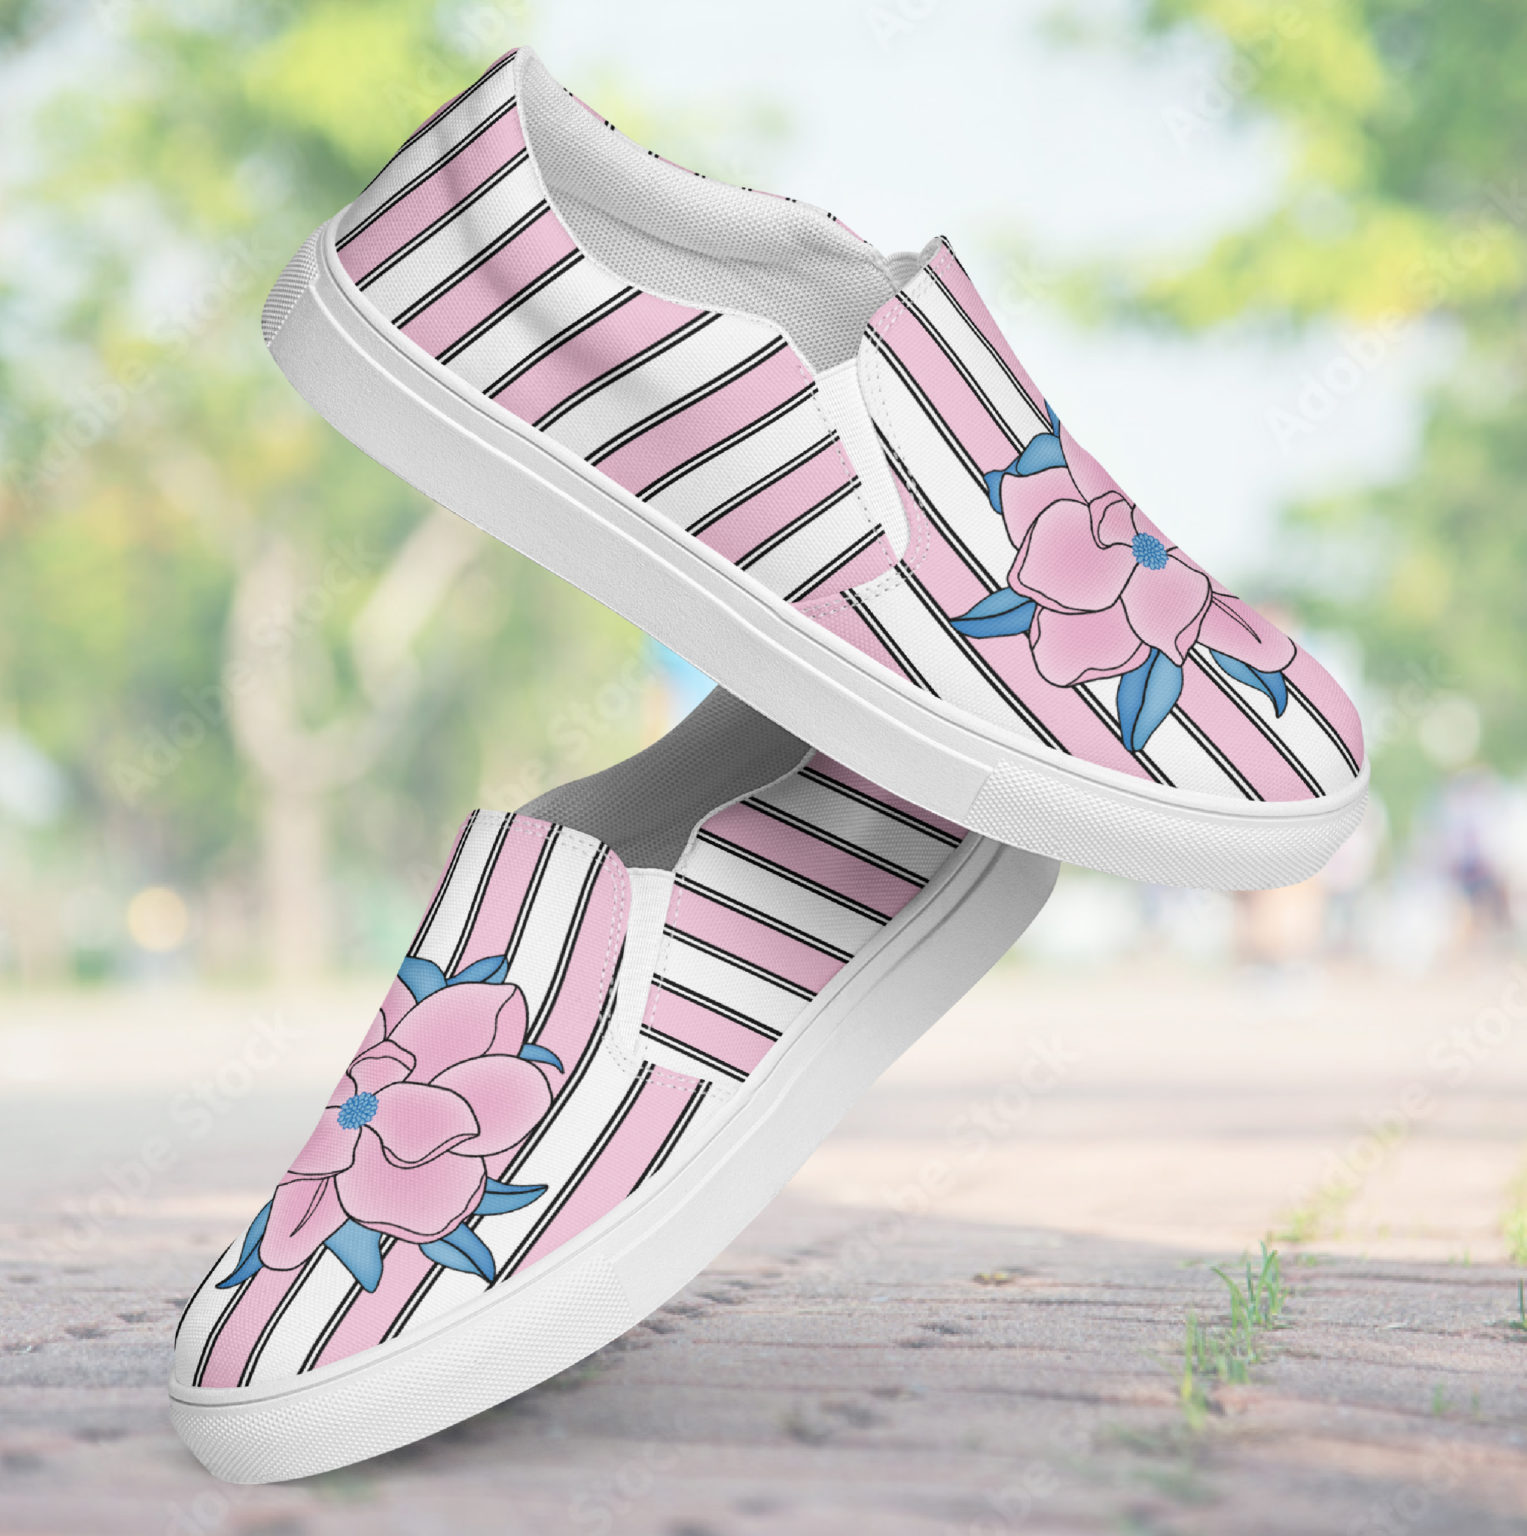 Canvas Slip-on Shoes